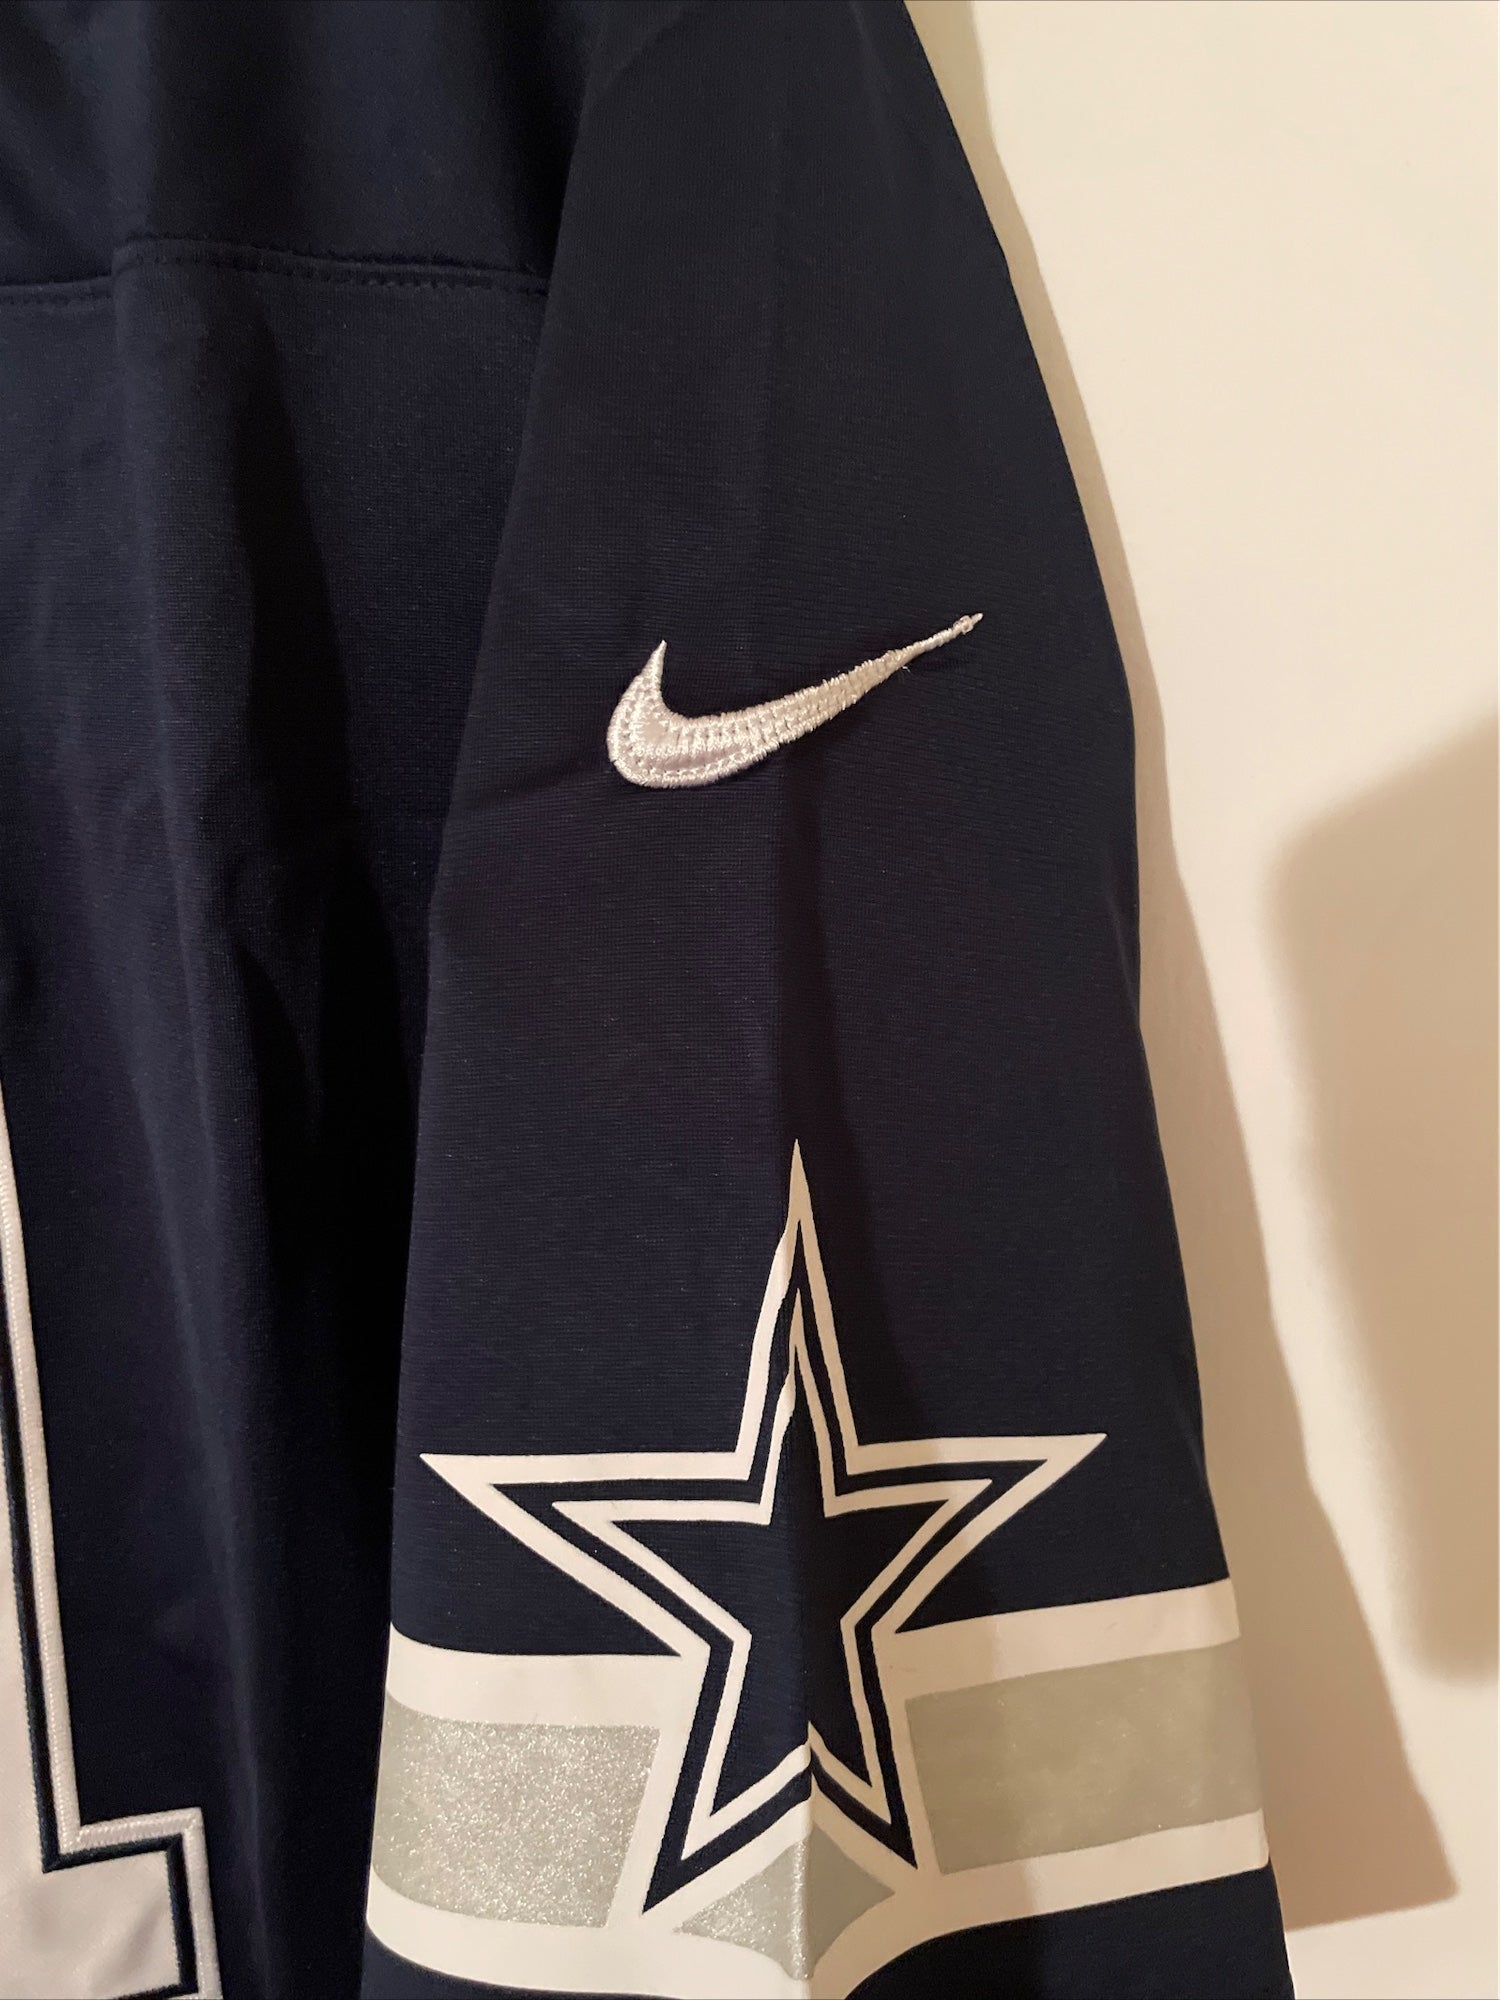 Brand New Dallas Cowboys Micah Parsons Jersey With Tags - Size